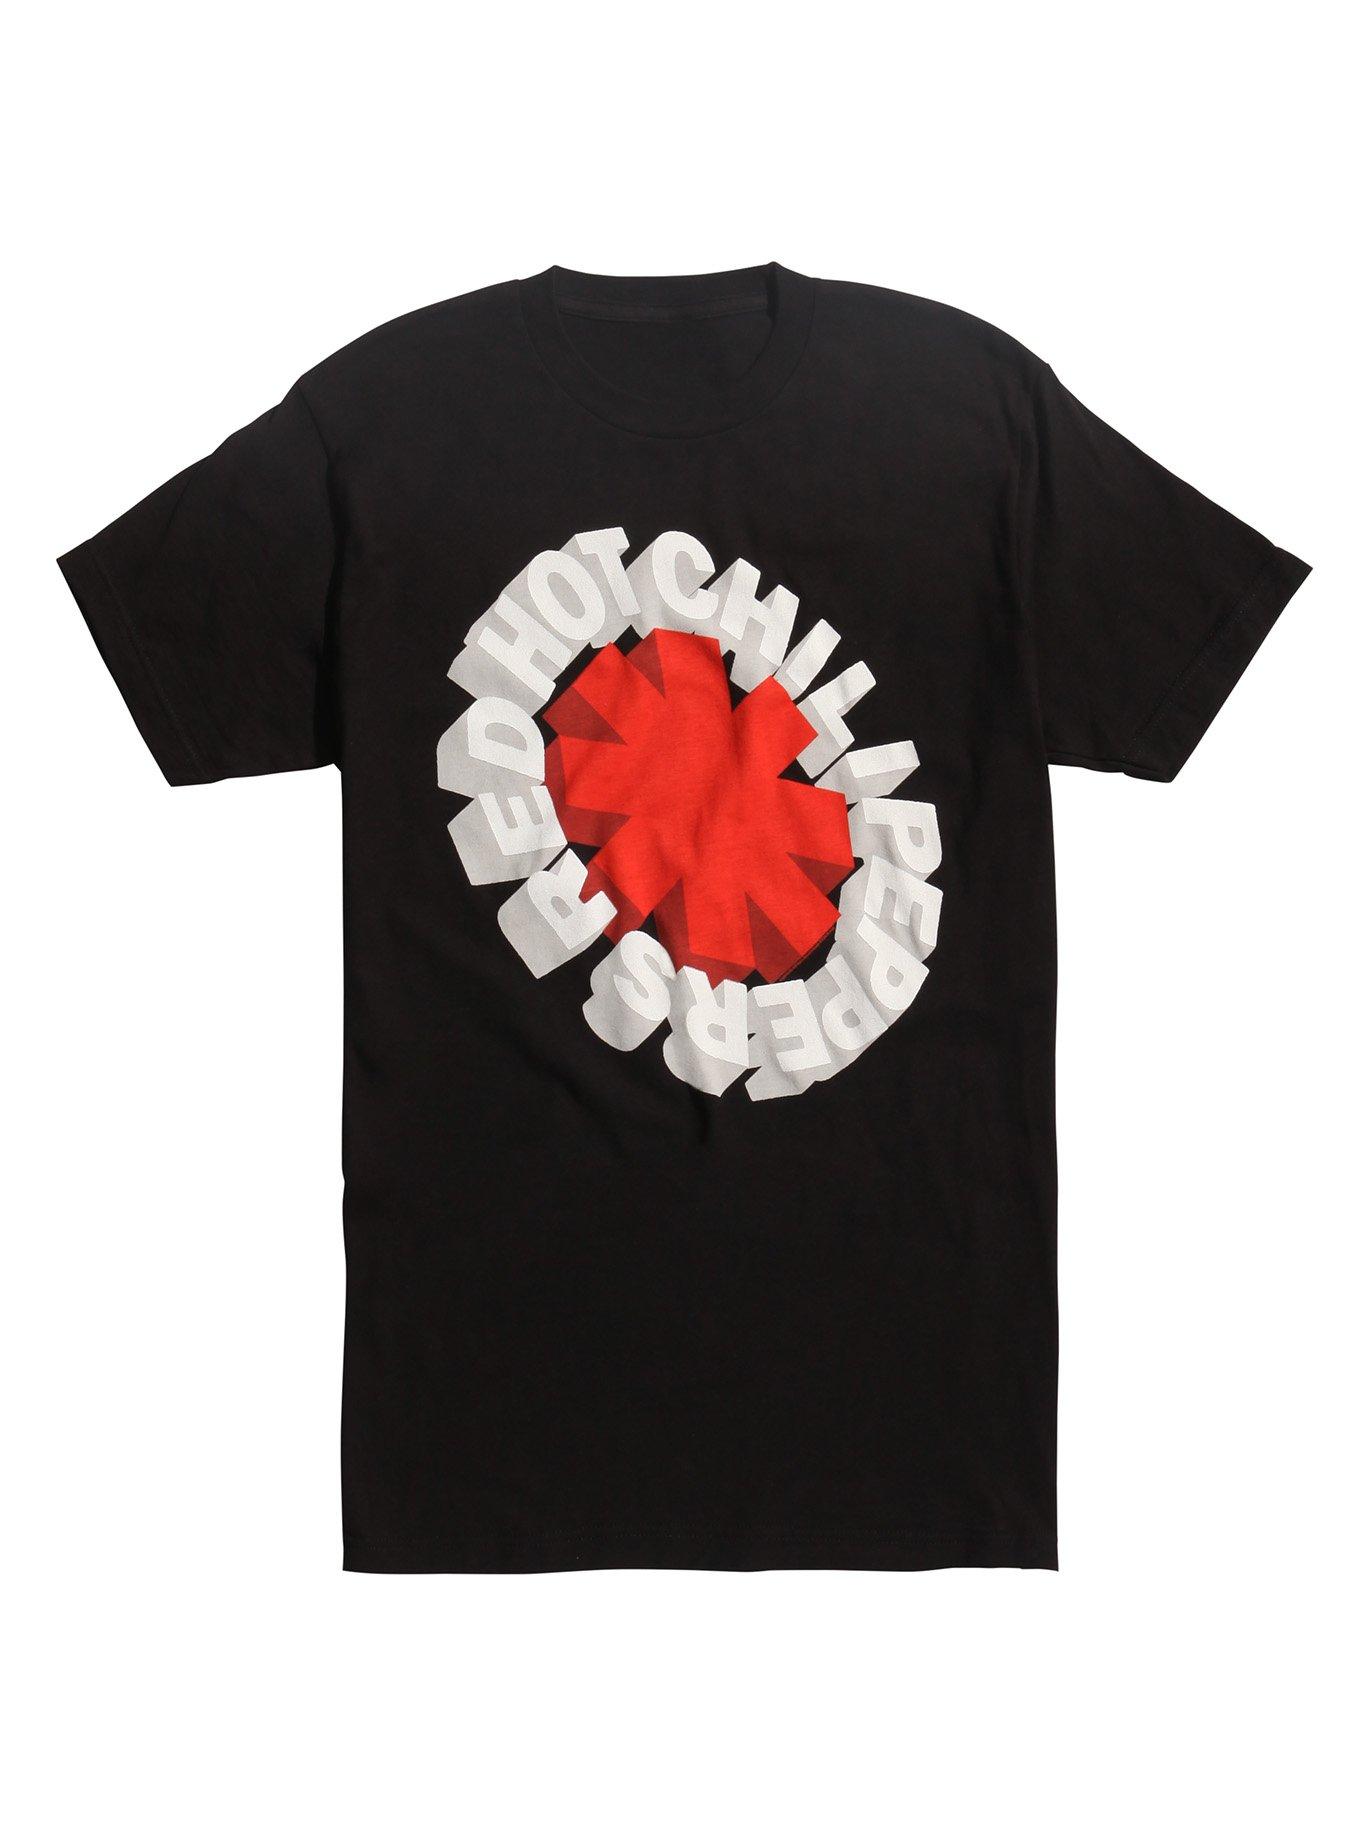 Red Hot Chili Peppers 3D Asterisk Logo T-Shirt, BLACK, hi-res